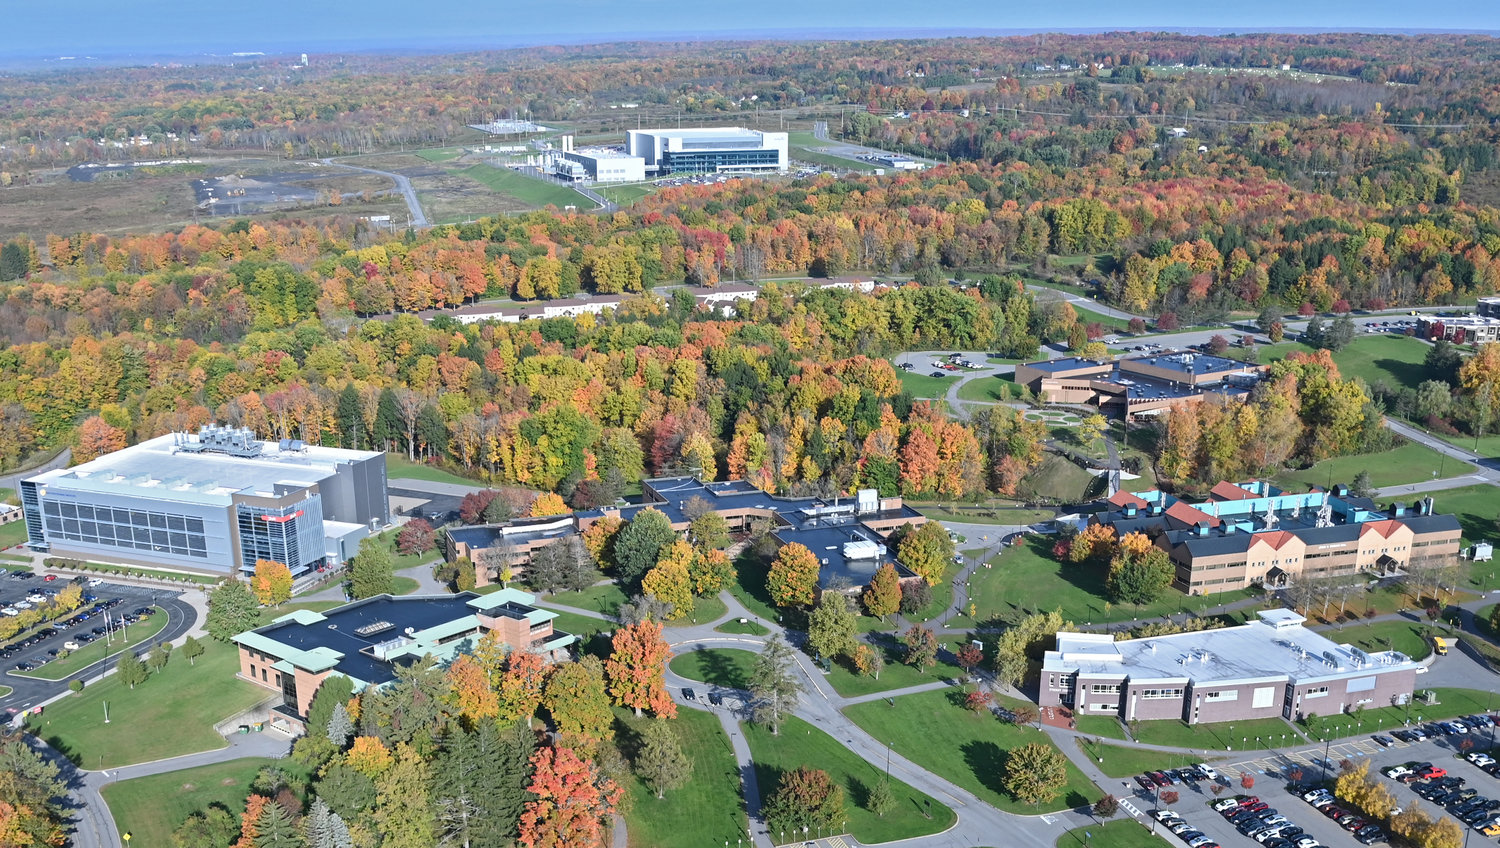 Pictured is an aerial of the SUNY Polytechnic Institute campus from Oct. 12, 2022. Danfoss Silicon Power (a silicon-carbide power module packaging operation at the Computer Chip Commercialization Center, better known as the Quad-C, on the SUNY Polytechnic campus) can be seen to the far left, and the under-construction Wolfspeed facility ( a silicon carbide computer chip fabricating facility in Marcy) can be seen in the far distance. In past years, stake holders noted one benefit of semiconductor industry facilities being seated close to one another are the  collaboration possibilities.